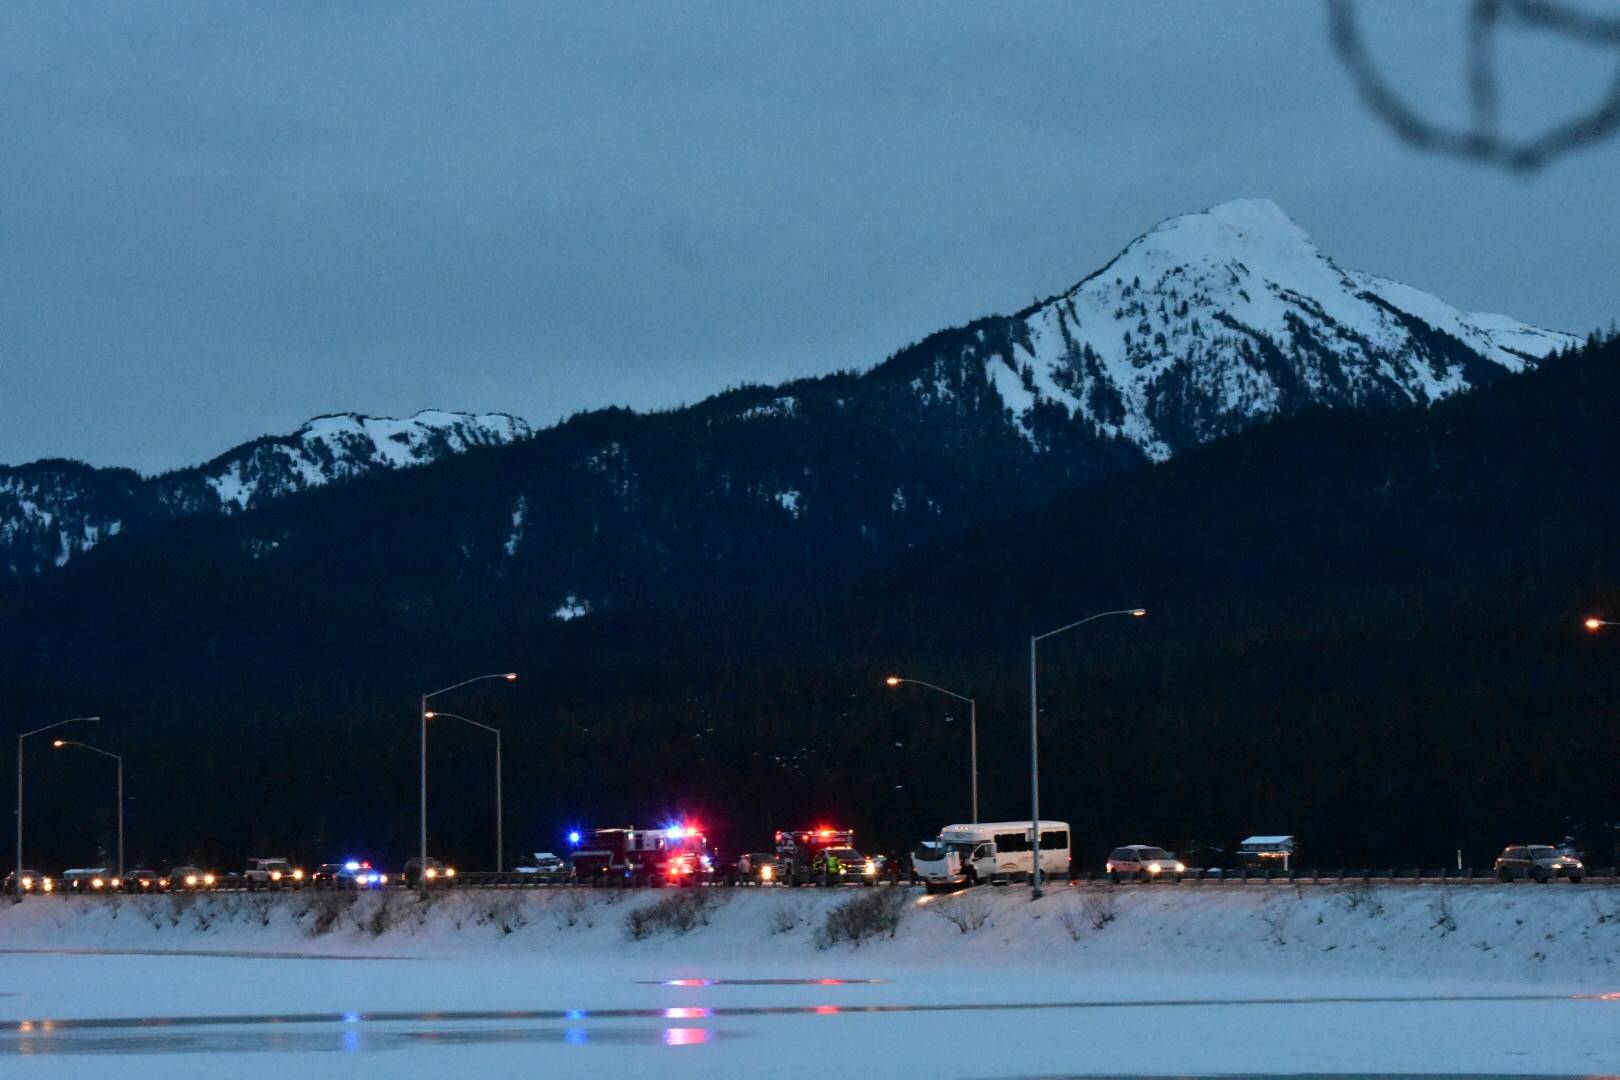 A Juneau Tours minibus crashed into a guardrail on Egan Drive near Twin Lakes for reasons unknown on Feb. 15, 2021. (Peter Segall / Juneau Empire)